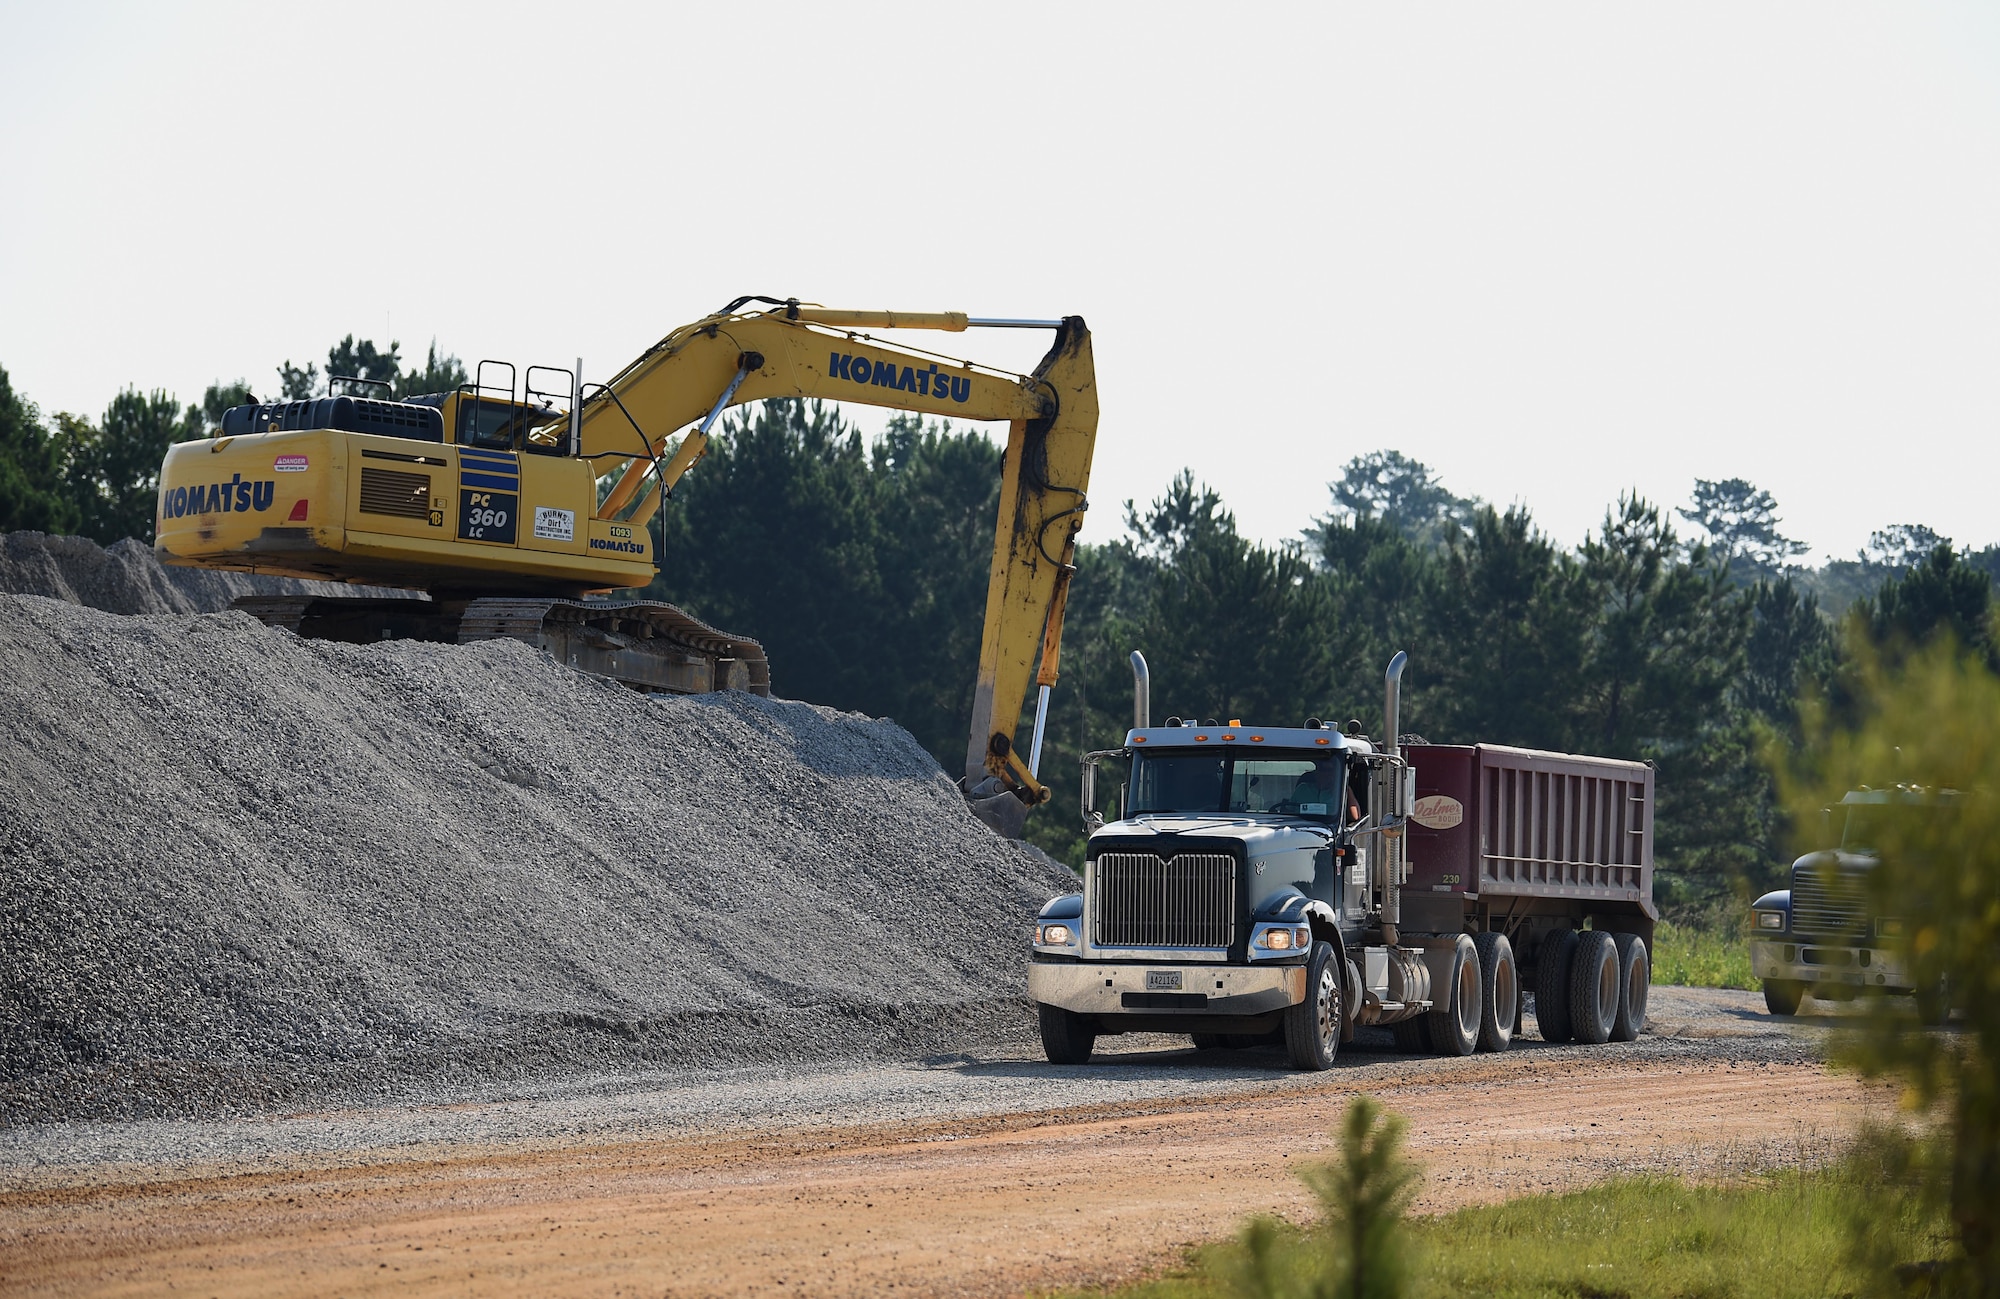 A construction crew contracted by the 14th Flying Training Wing prepares to transport stones to the outside runway July 26, 2018, on Columbus Air Force Base, Mississippi. The last time this large of a runway project was completed was in 2005. (U.S. Air Force photo by Airman 1st Class Keith Holcomb)